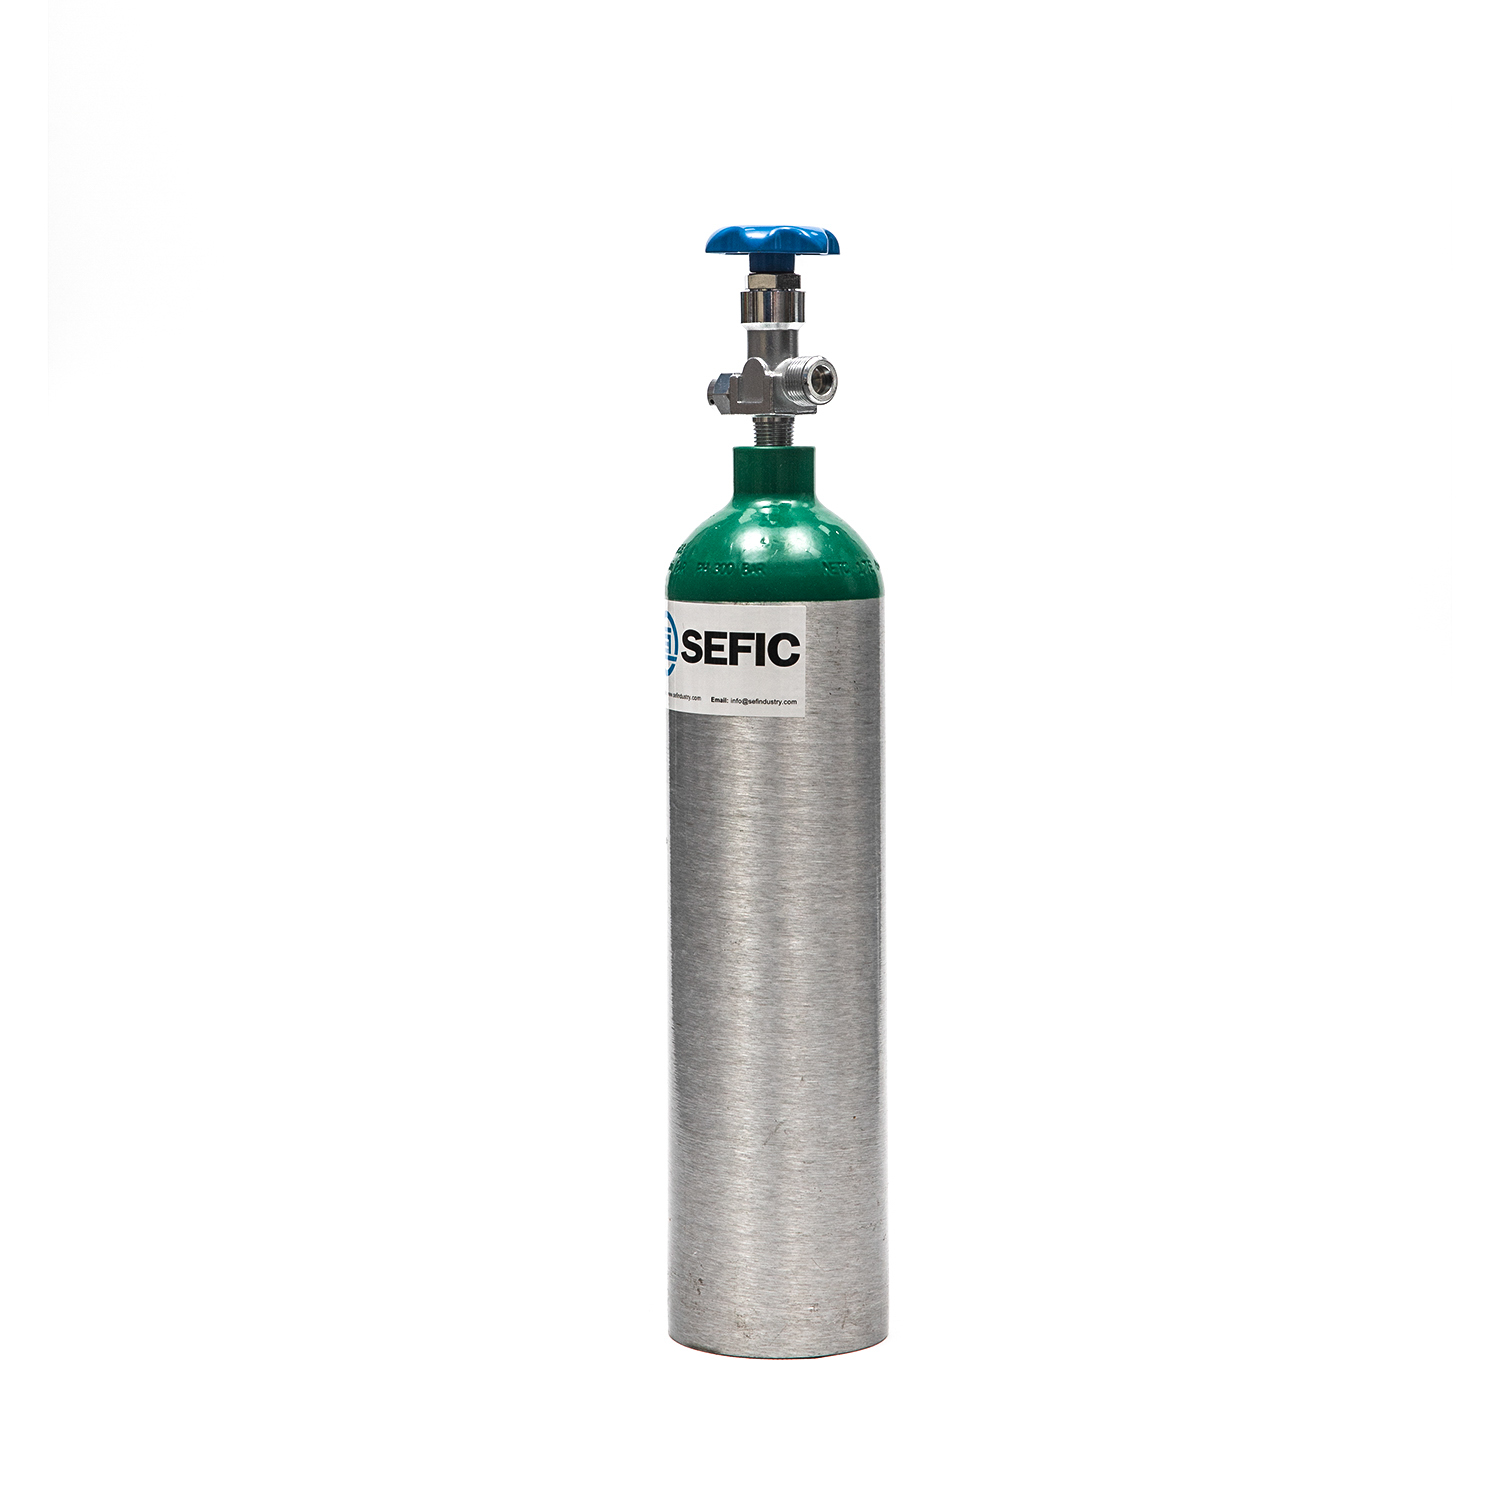 0.6L-50L Aluminum Cylinder Guaranteed Quality Compact Low Price